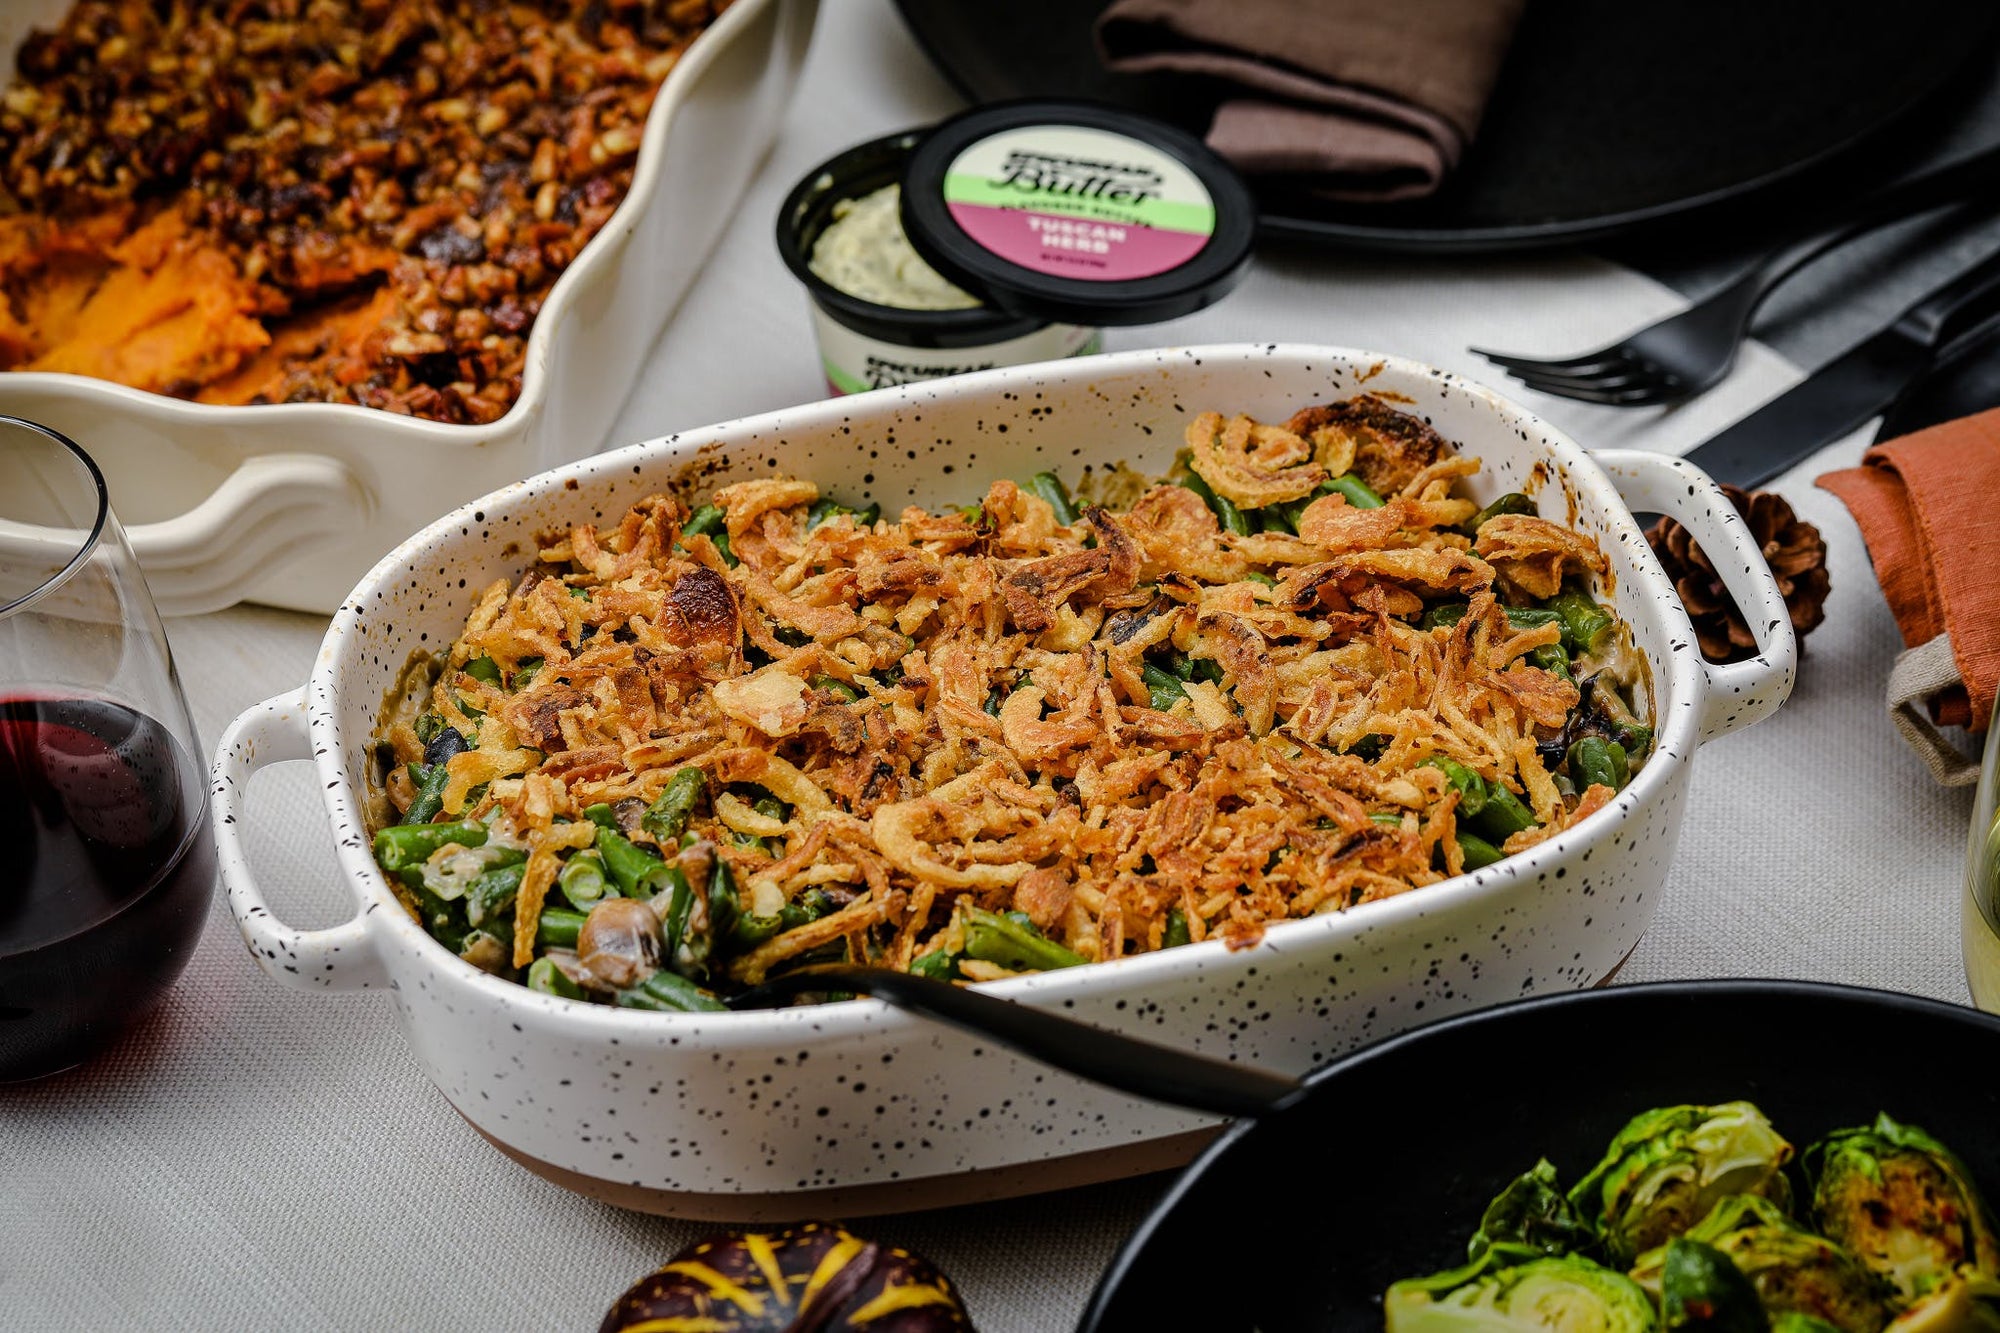 Green Bean Casserole made with Epicurean Butter Tuscan Herb Flavored Butter